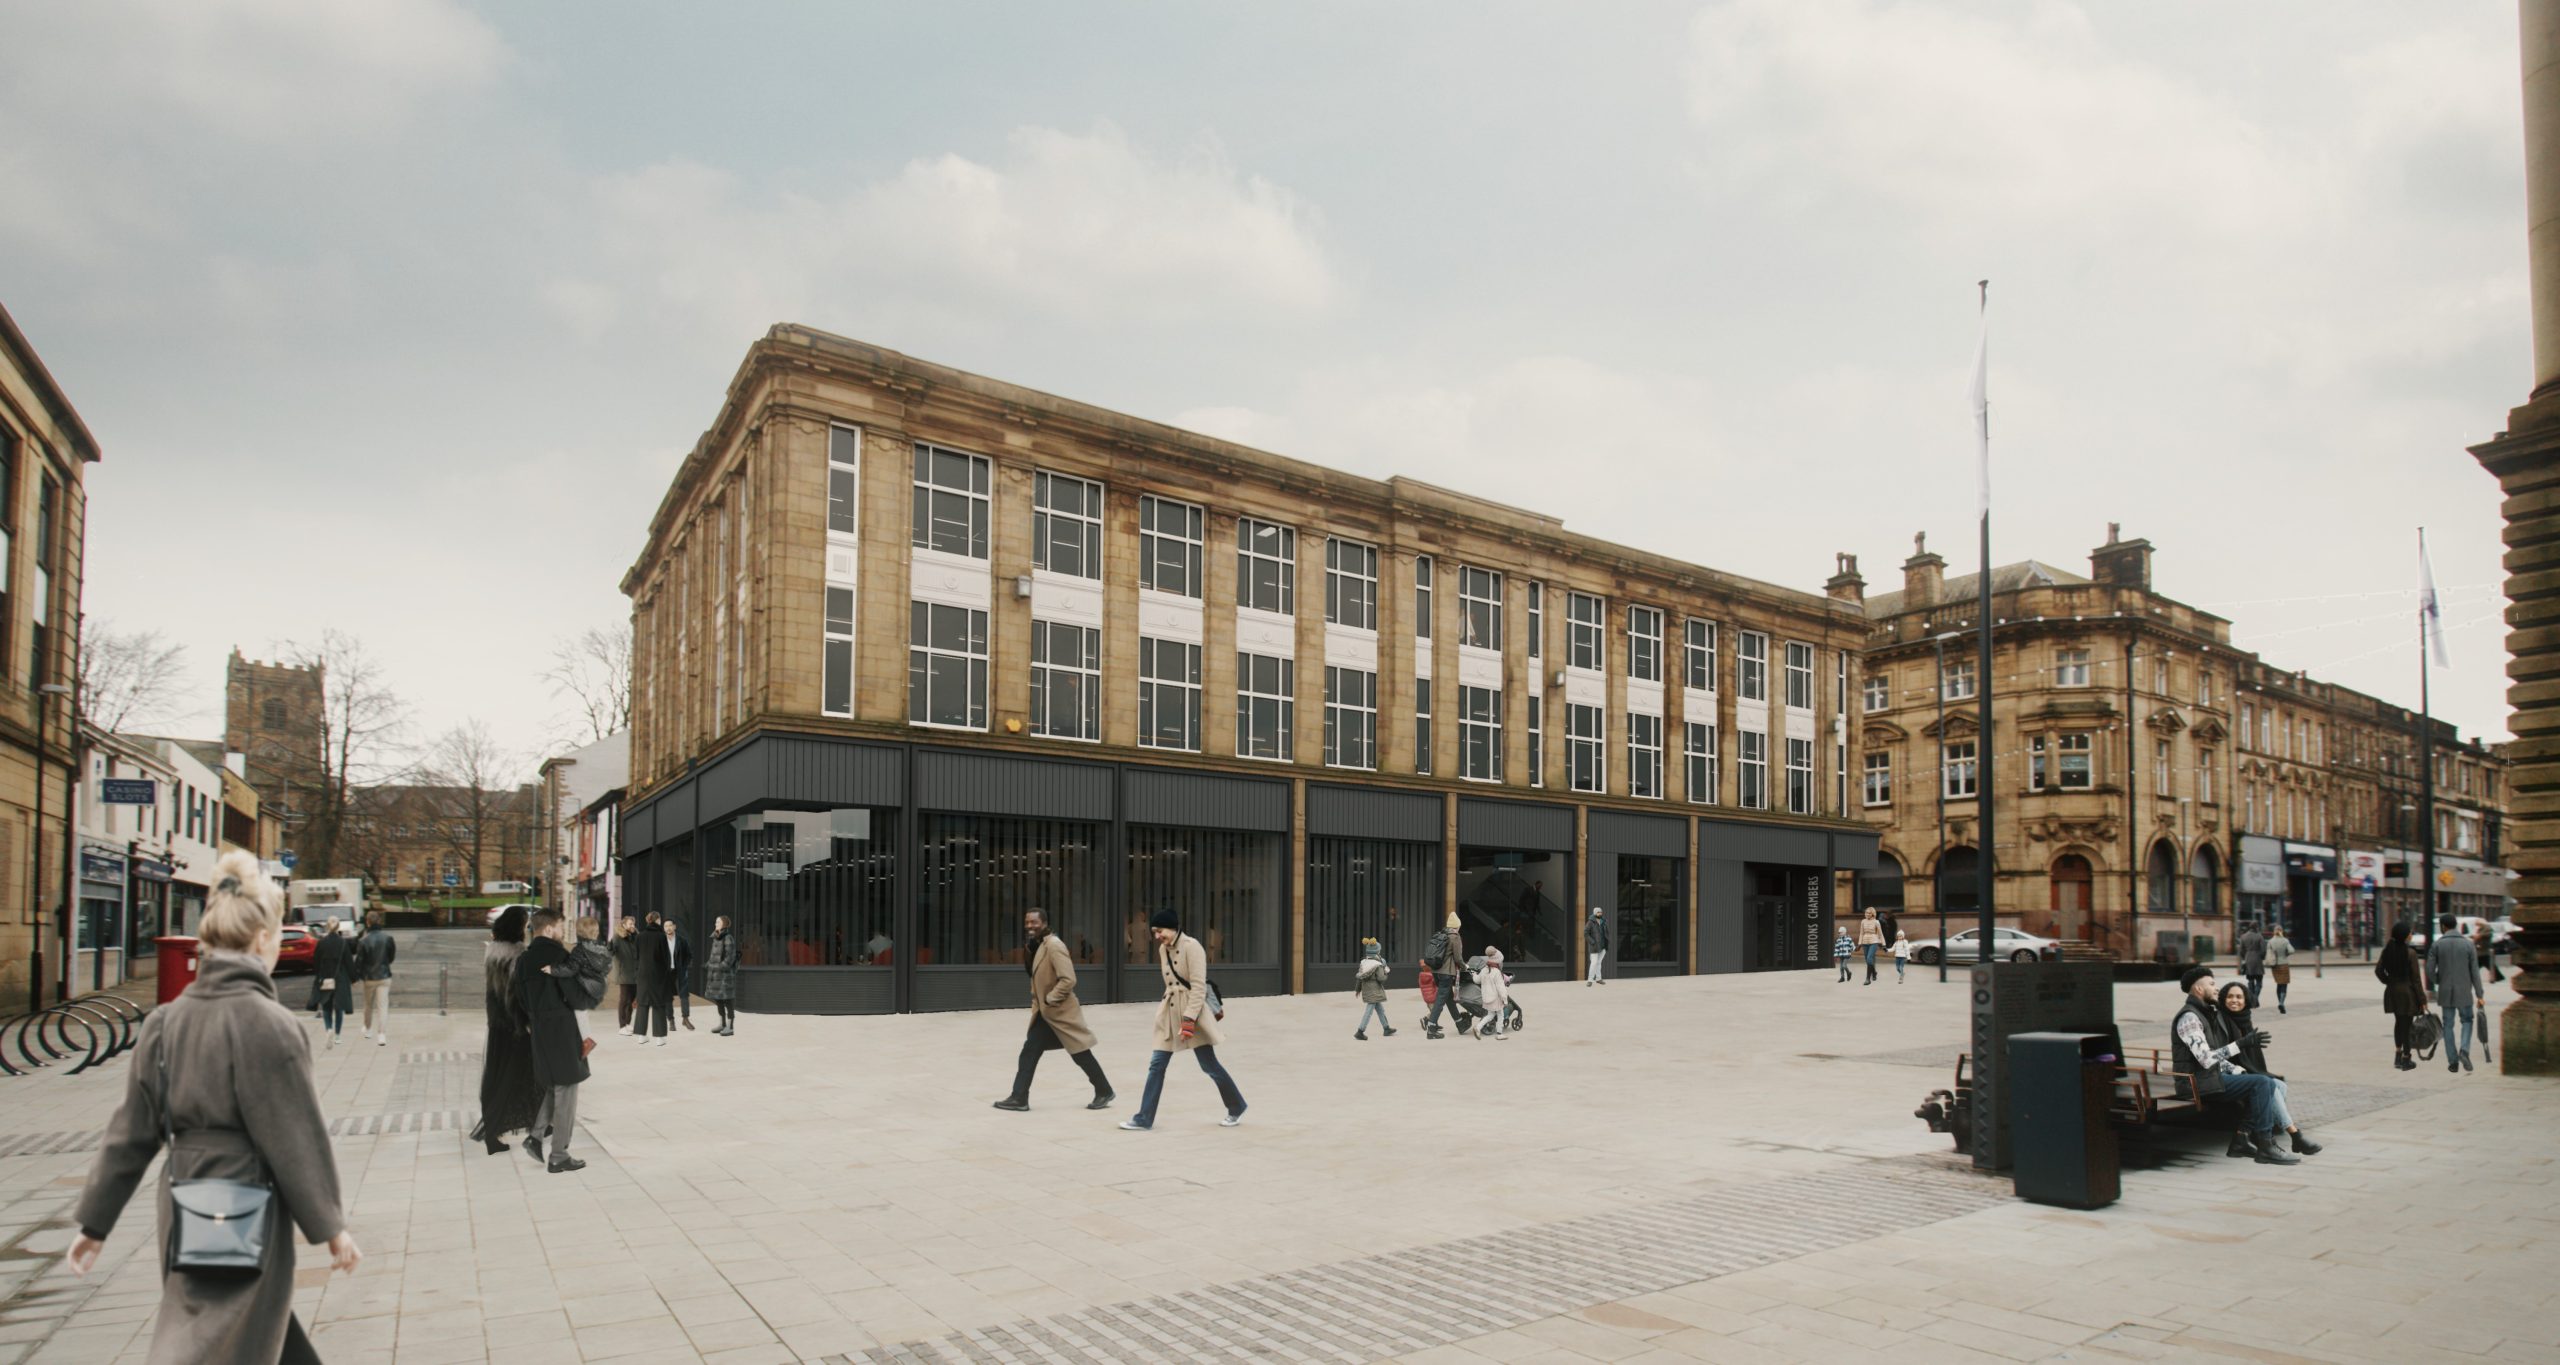 Planning Application Submitted for Accrington Town Square Redevelopment